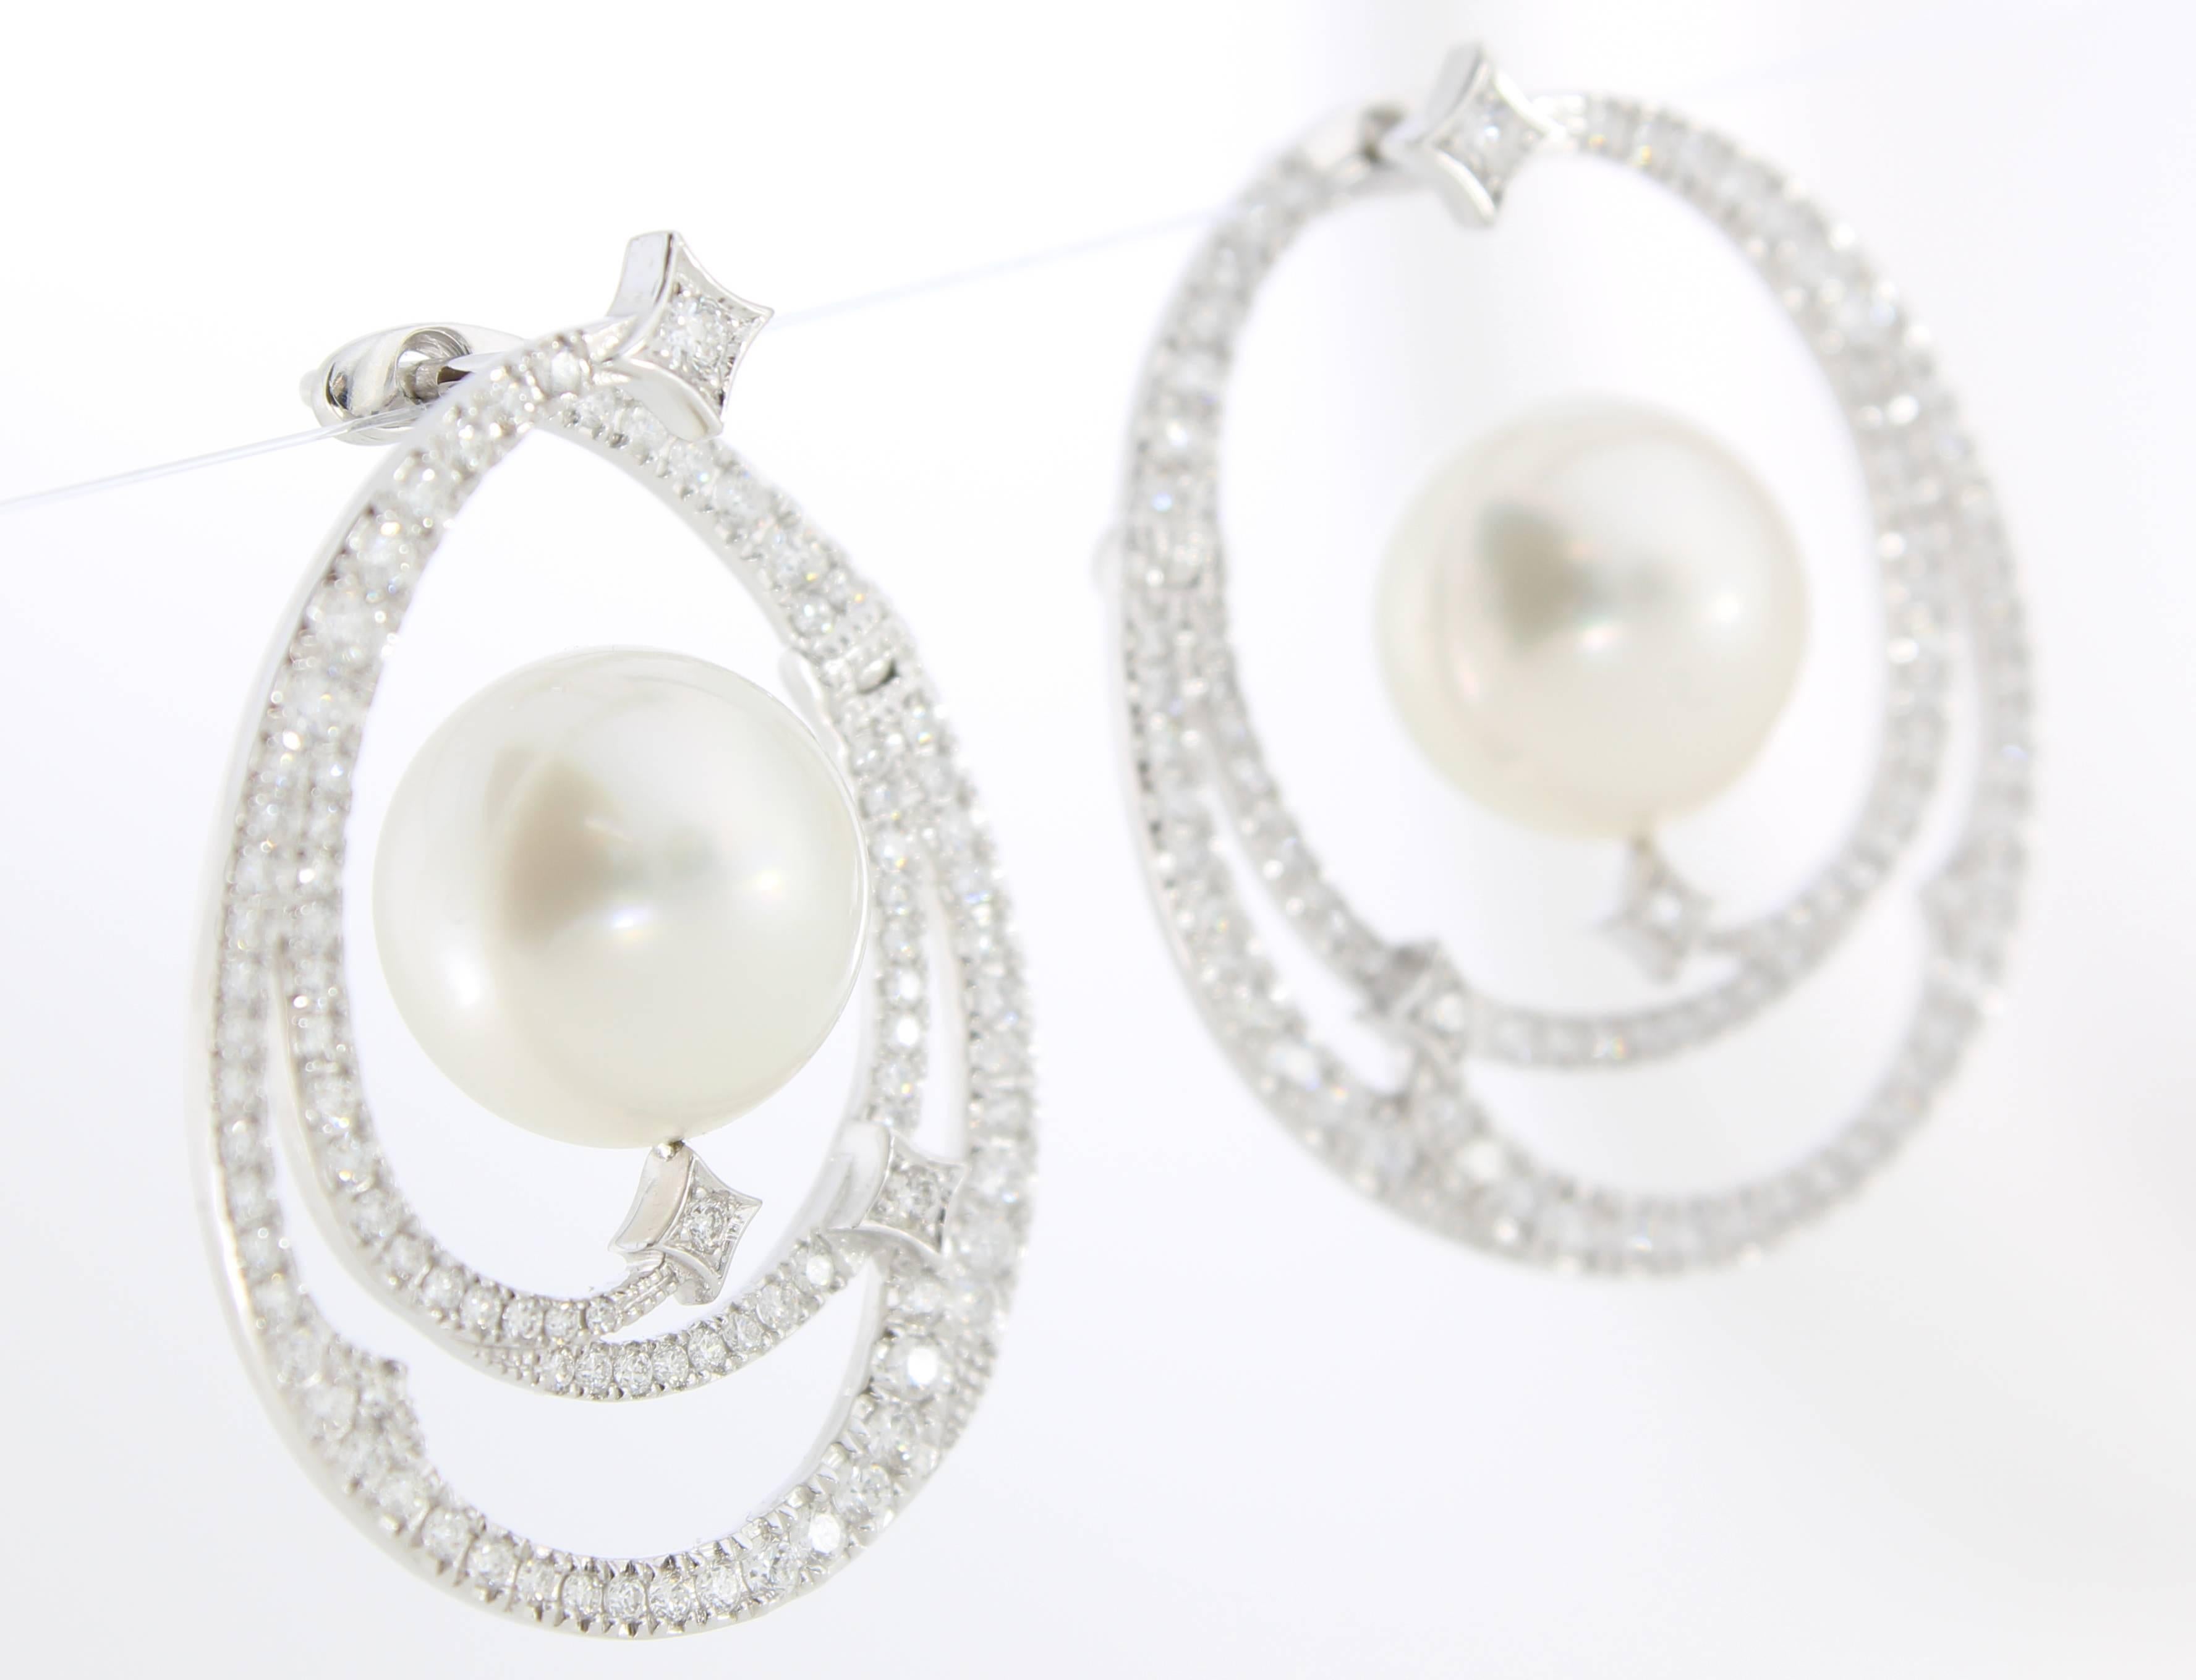 The Moondust Earrings are from the AUTORE Stars & Galaxies Collection. 
This piece is crafted in 18k White Gold with White Diamonds (H SI 1.747ct Brilliant Cut) and 12mm White South Sea Pearls. 